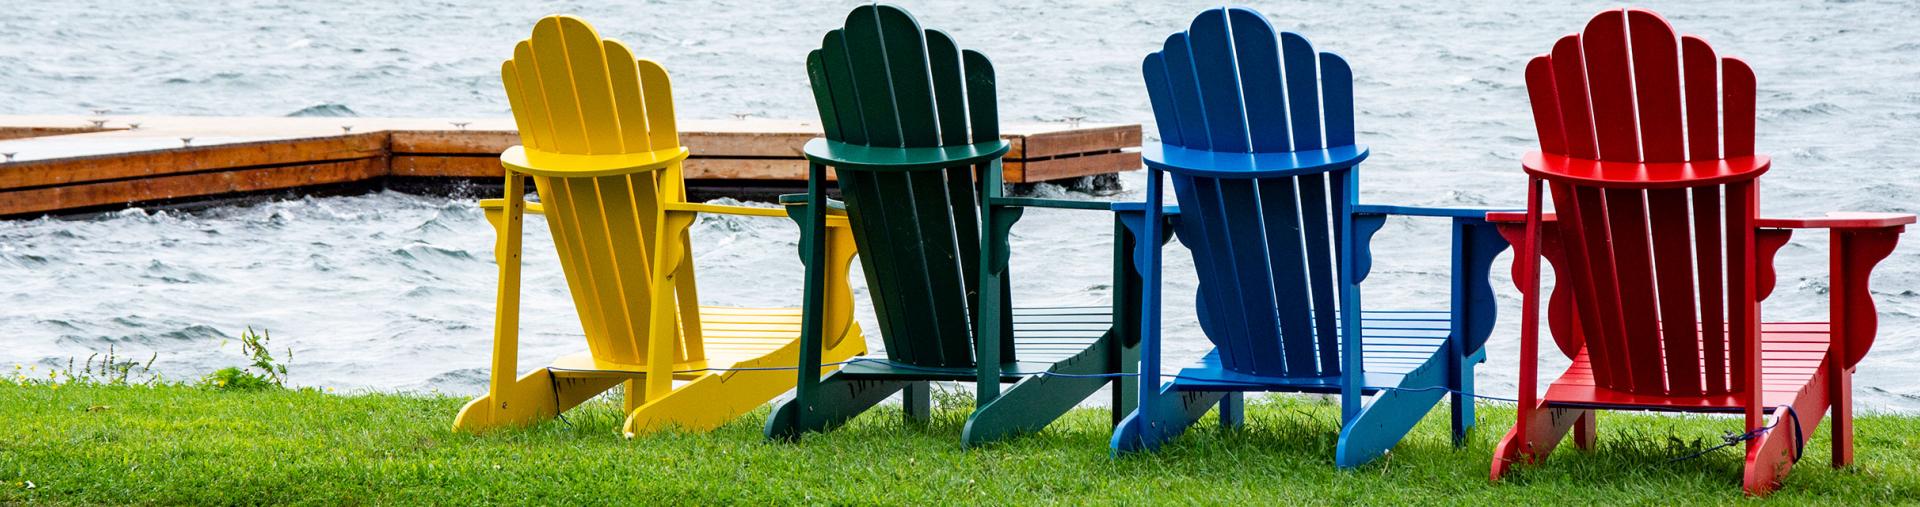 Adirondack chairs by the river